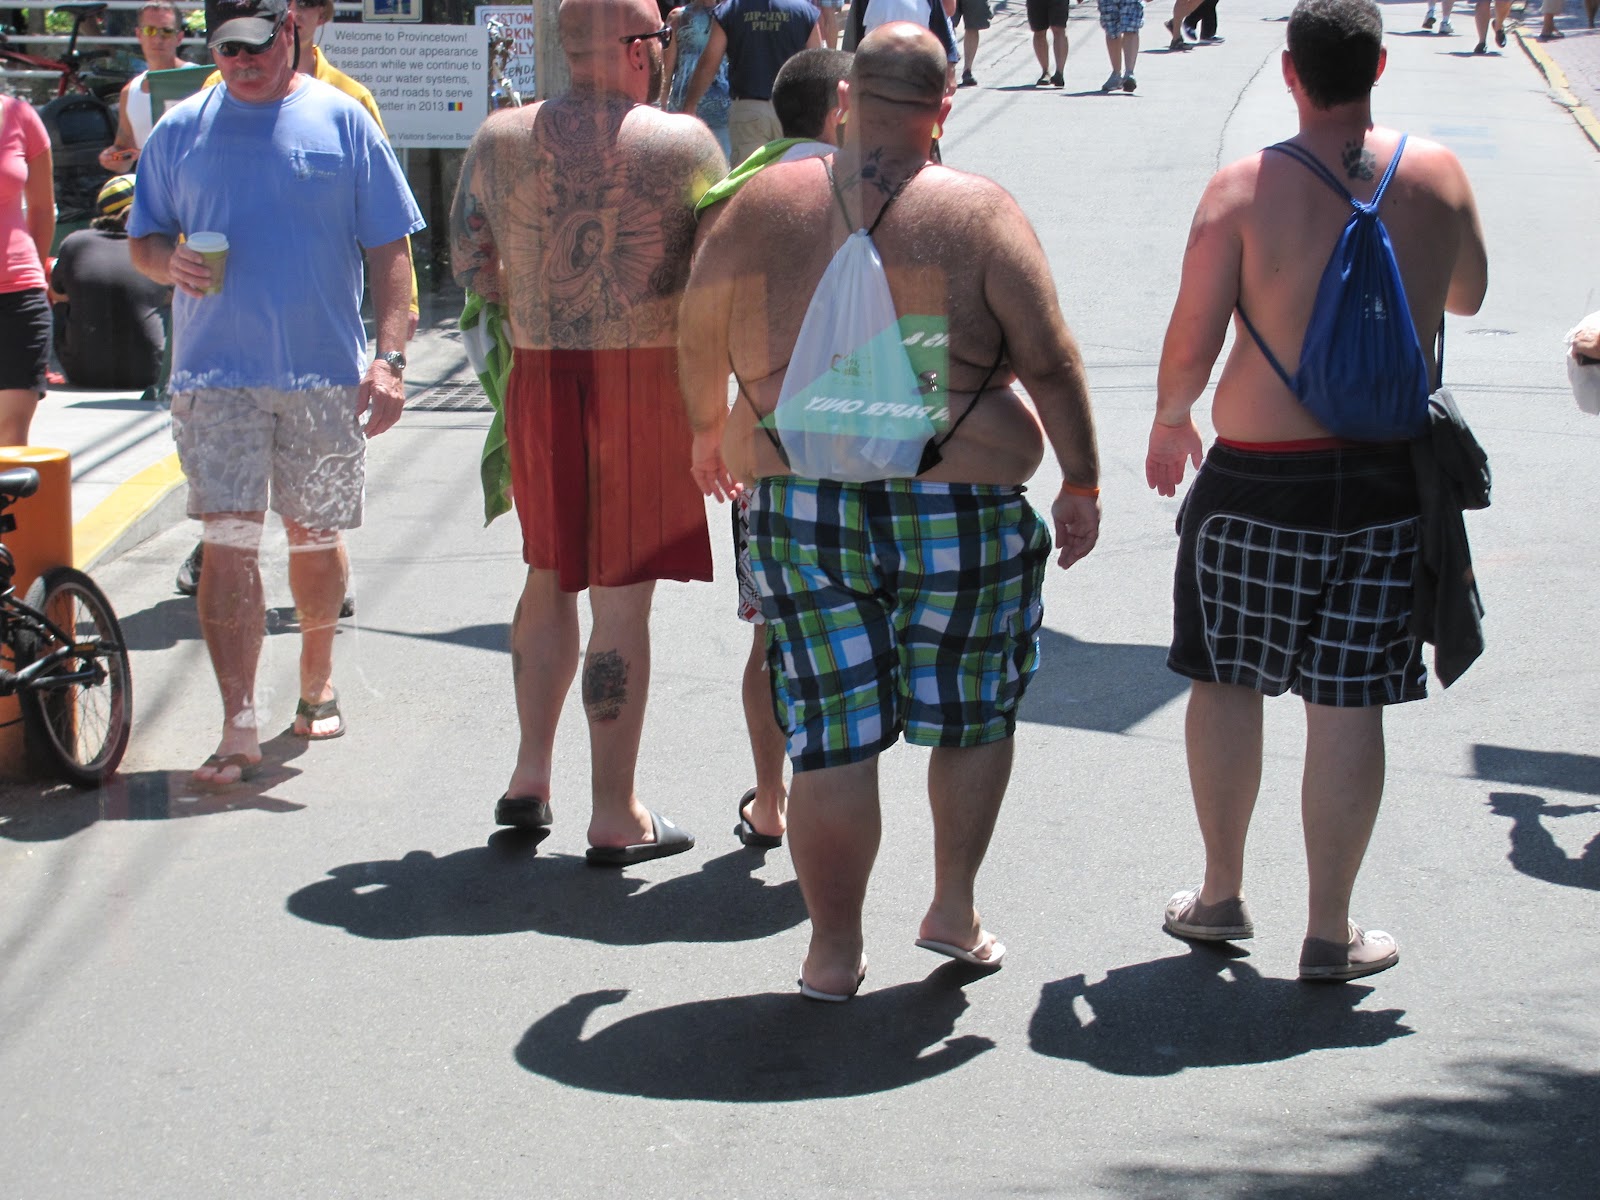 TheYearRounder's Guide to Provincetown: July 2012